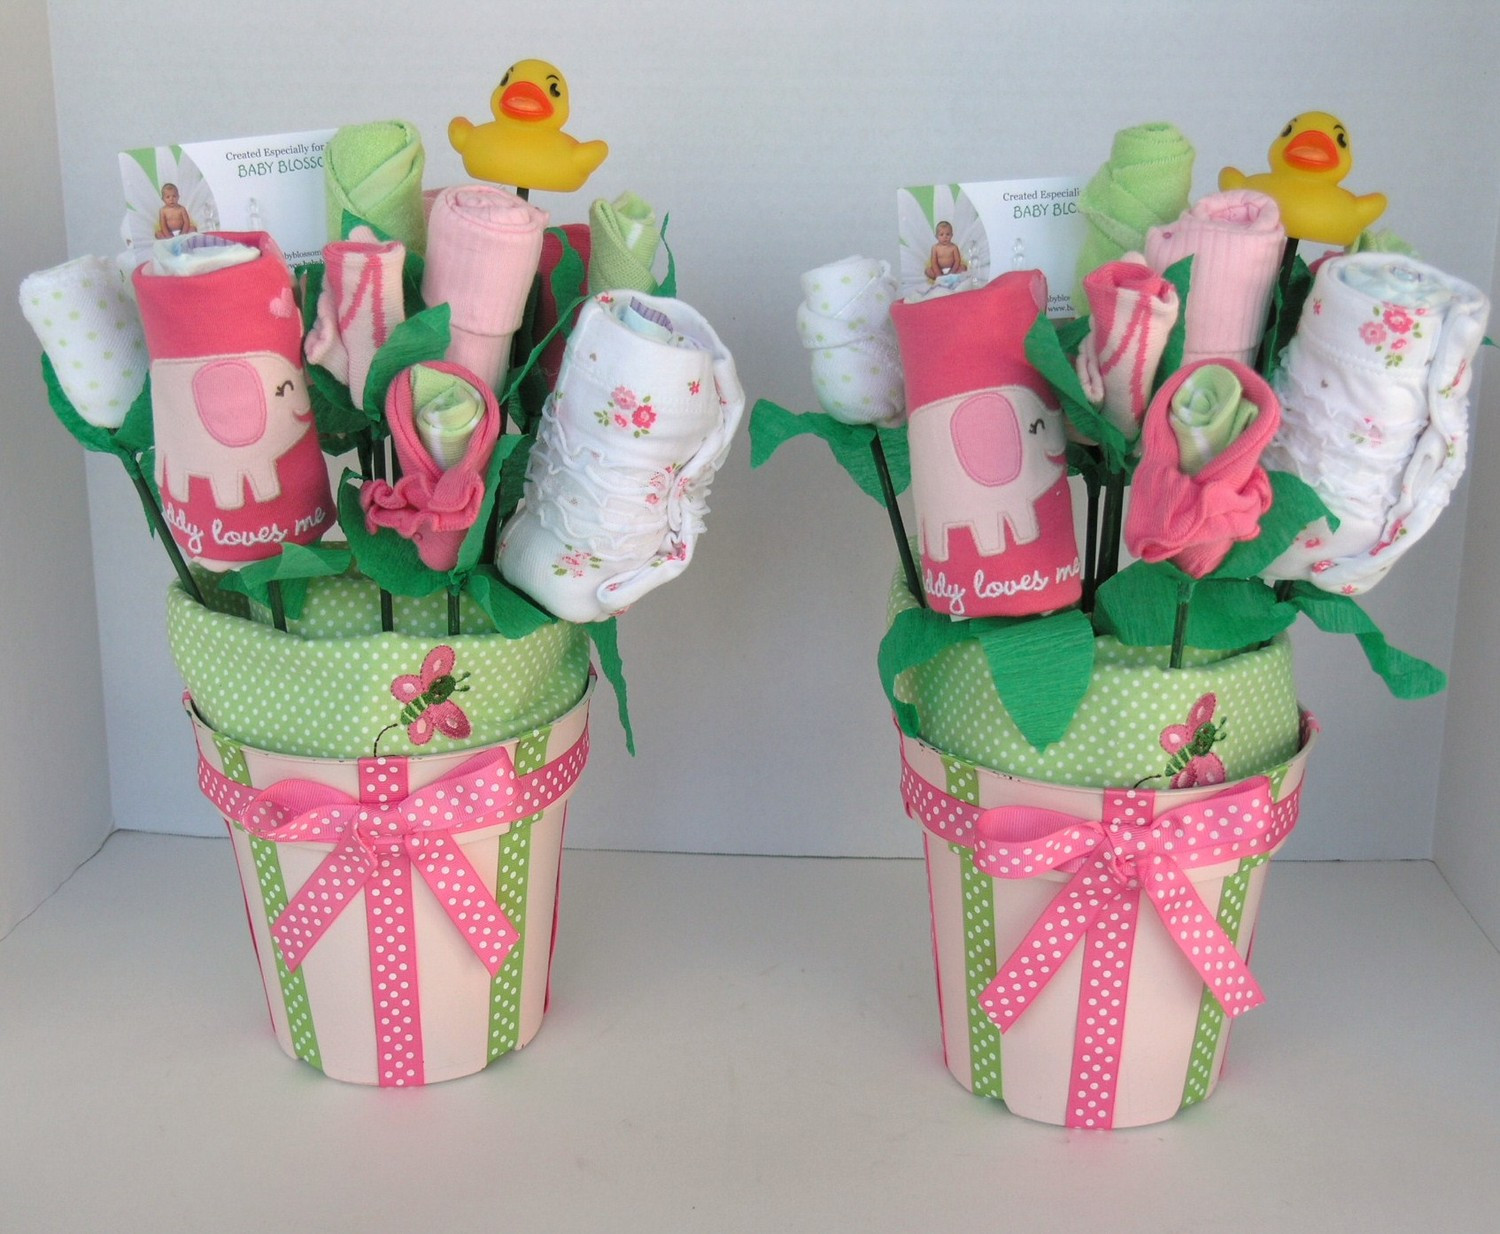 Baby Shower Homemade Gift Ideas
 Five Best DIY Baby Gifting Ideas for The Little Special